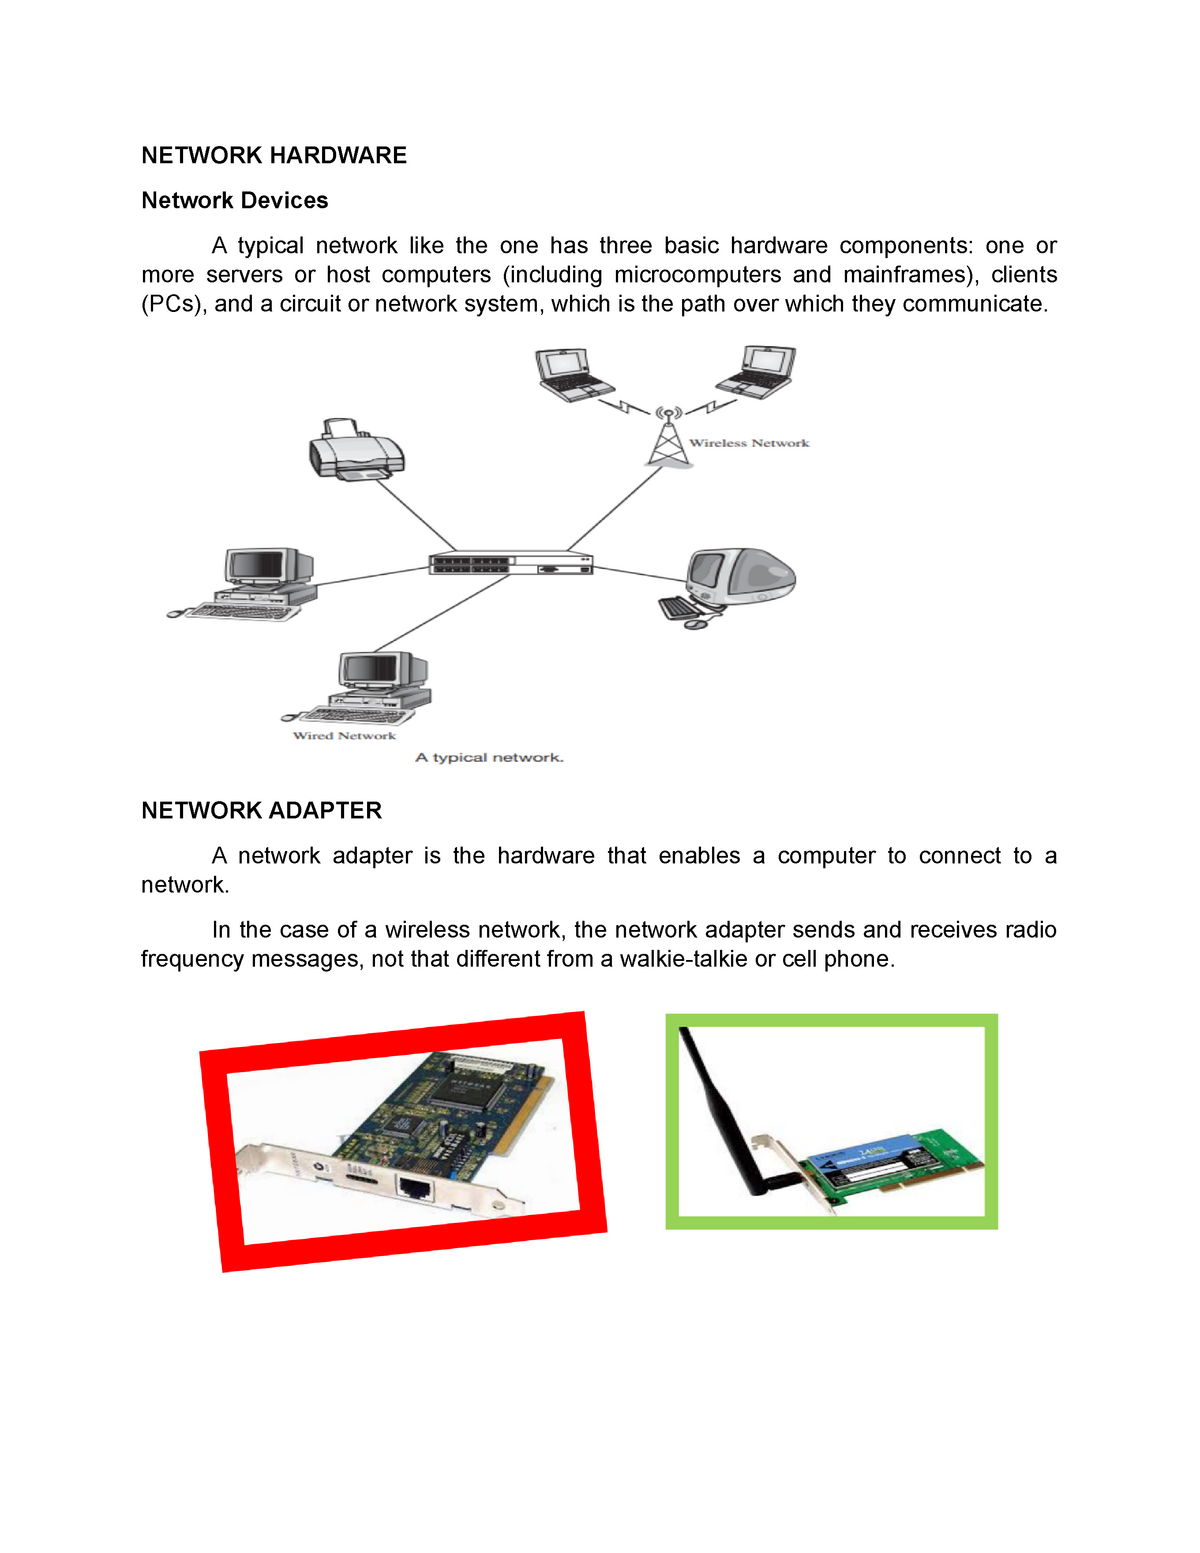 server computer networking devices